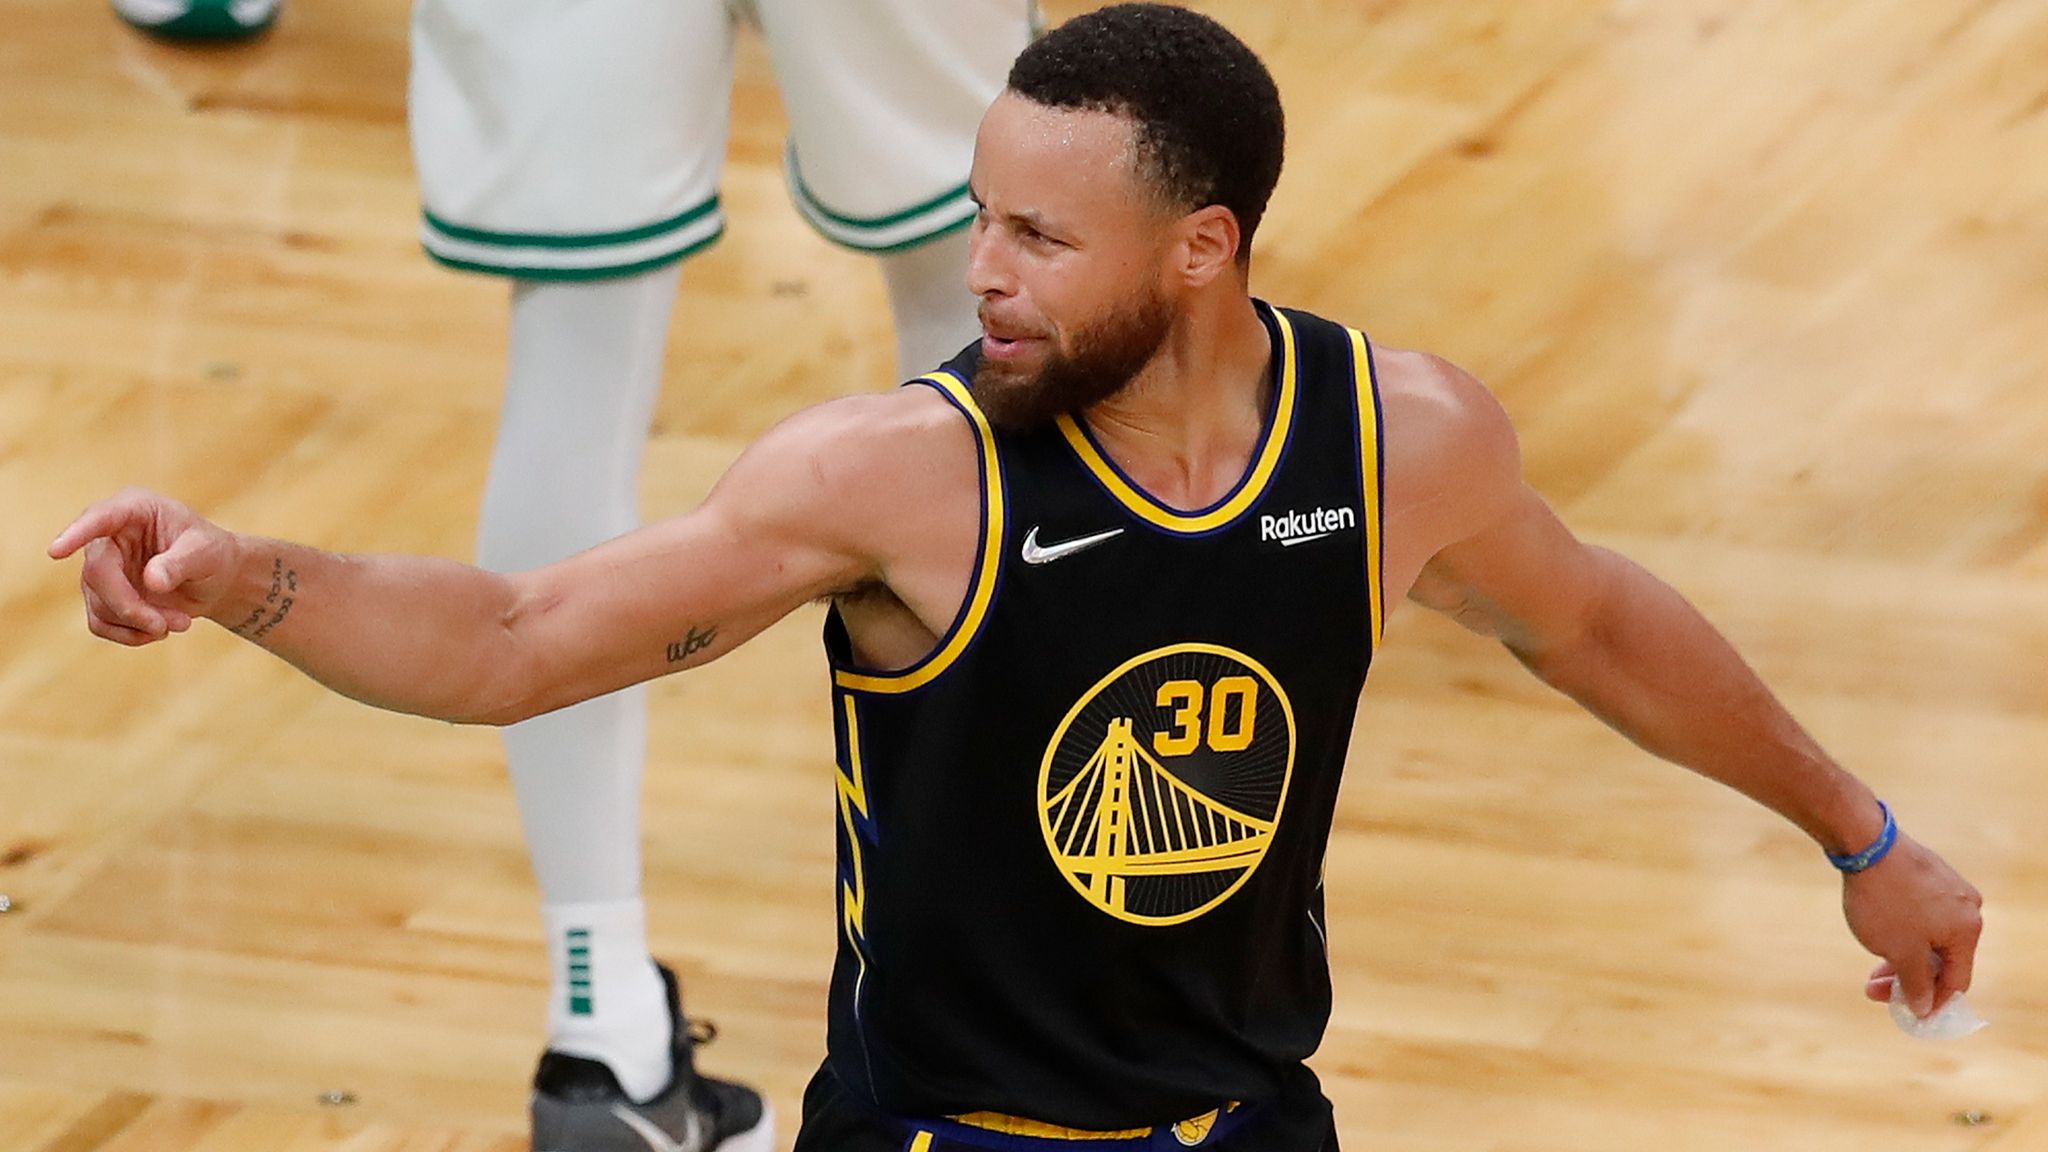 Stephen Curry's 'stunning' Finals Game 4 performance evens